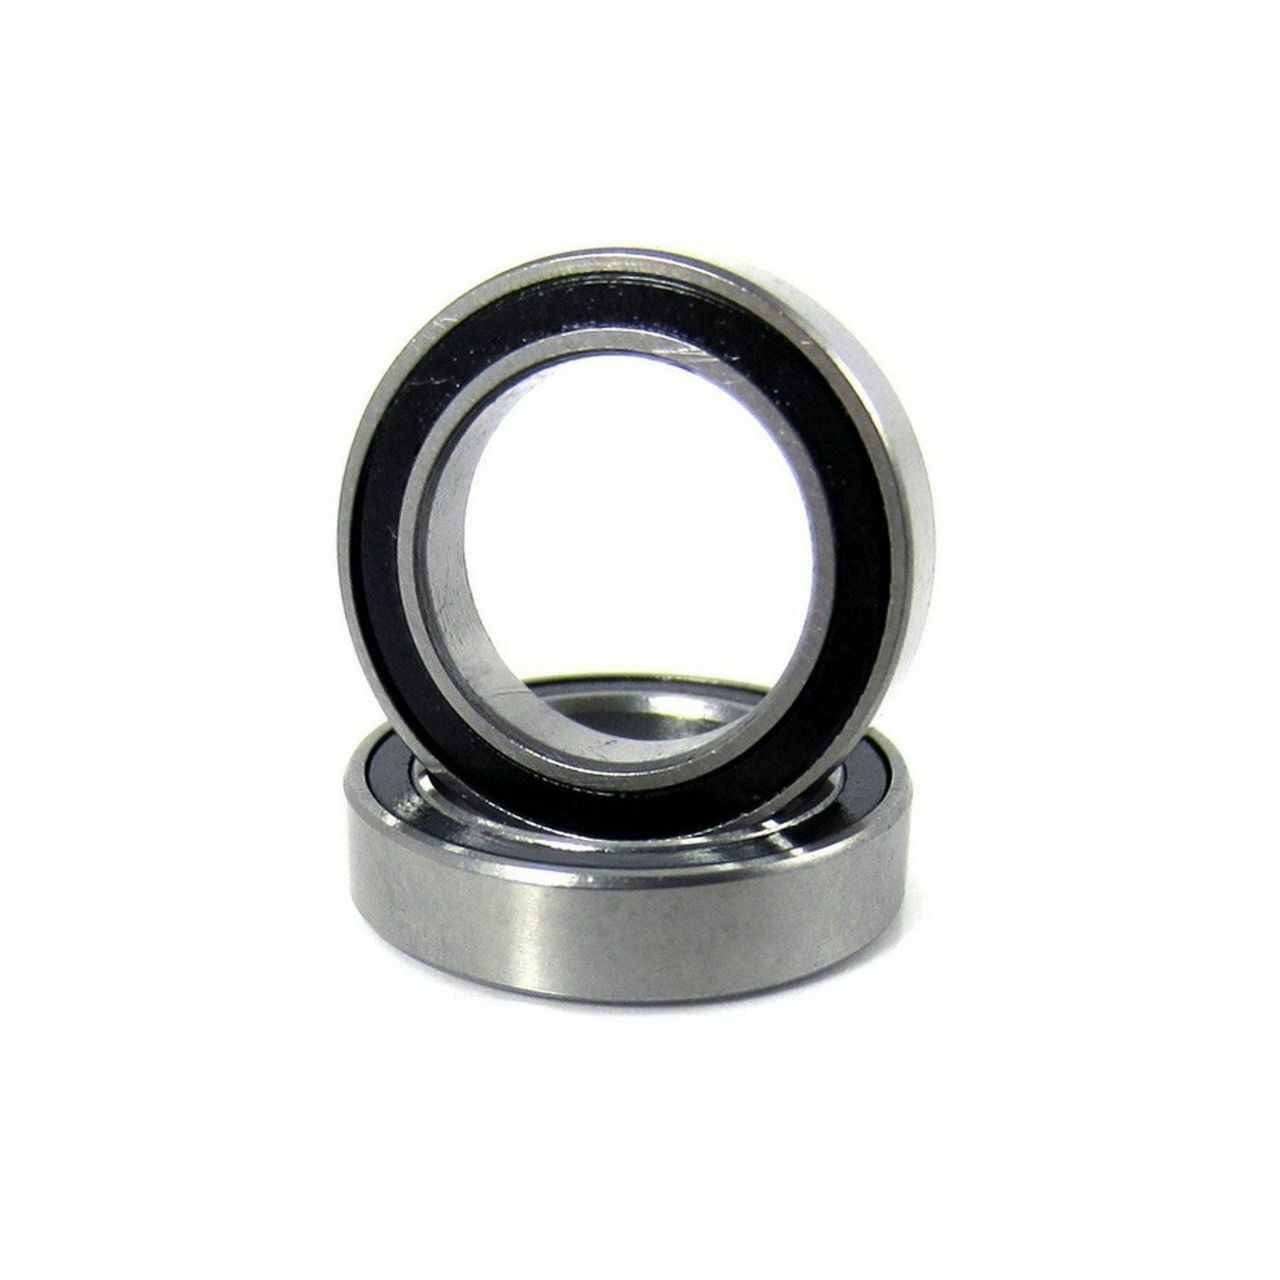 6701-2RS 12x18x4mm Precision High Speed RC Car Ball Bearing, Chrome Steel (GCr15) with Black Rubber Seals ABEC-1 ABEC-3 ABEC-5